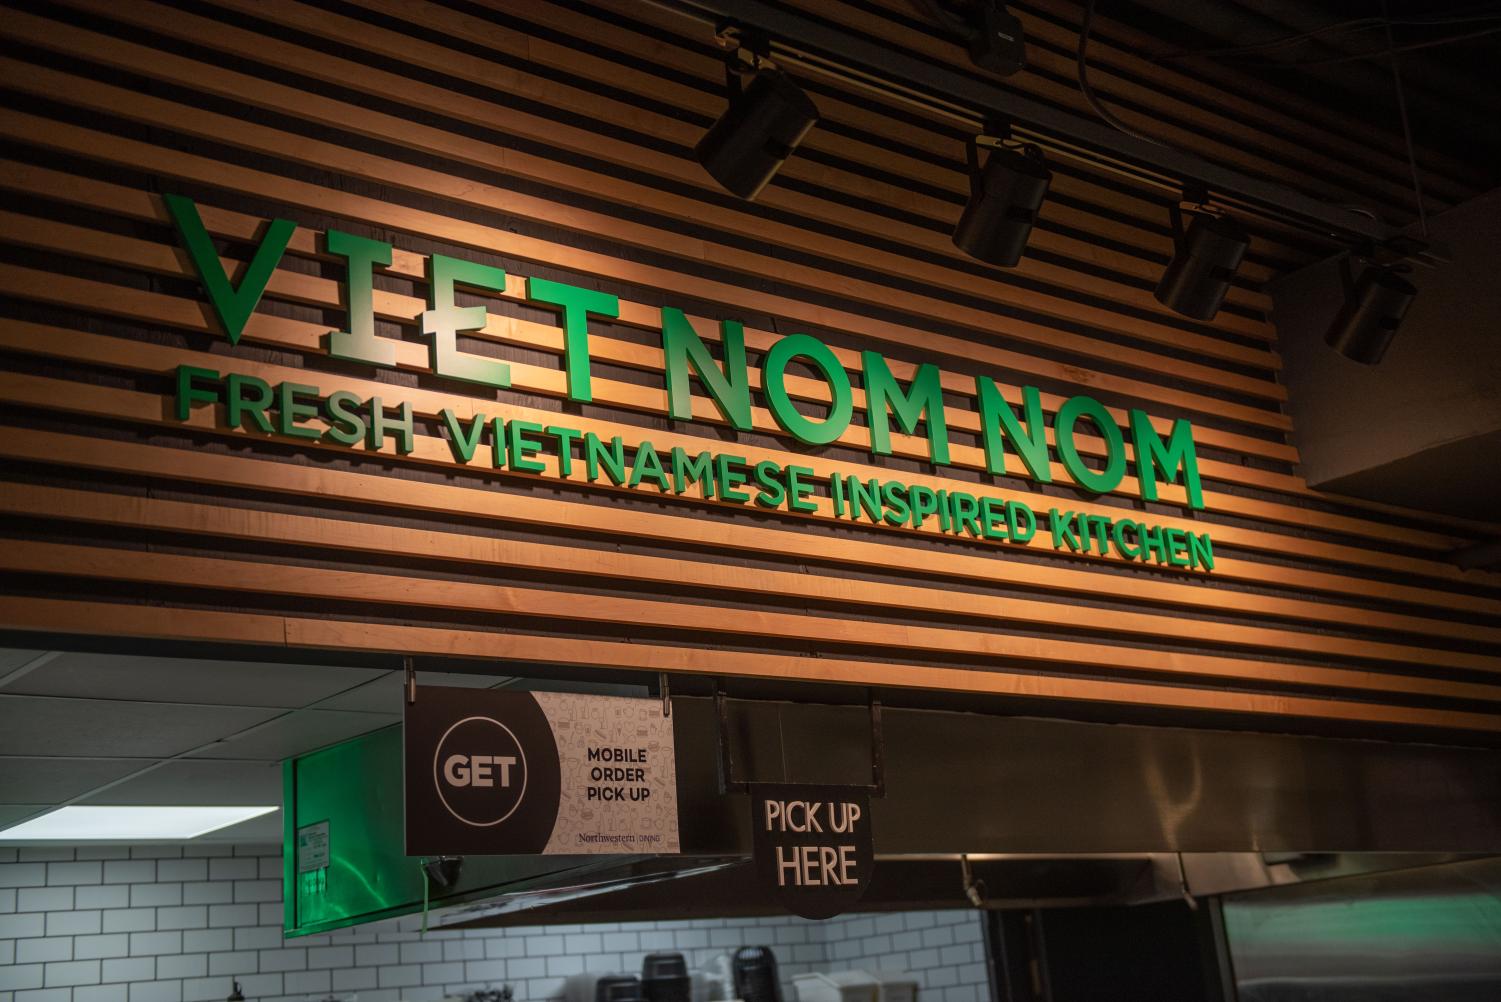 A+brown+sign+with+the+words+%E2%80%9CViet+Nom+Nom+Fresh+Vietnamese+Inspired+Kitchen%E2%80%9D+in+green.